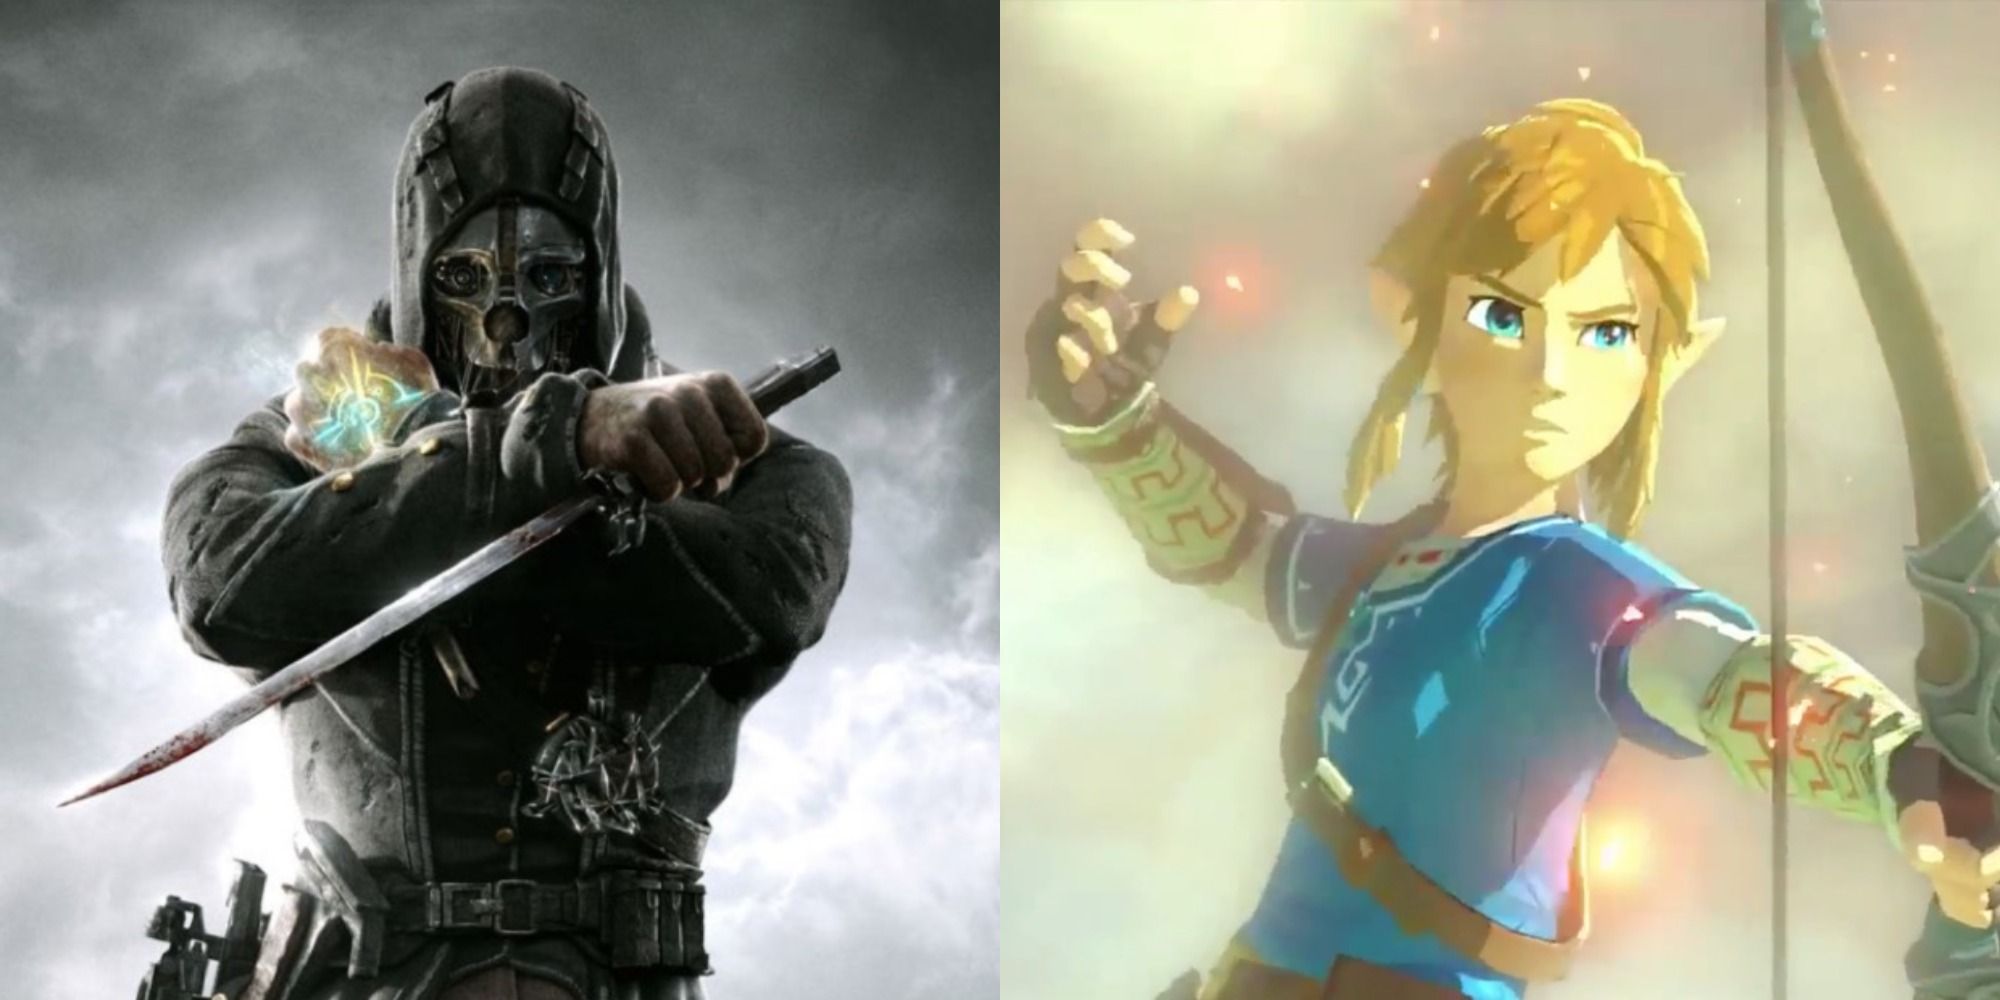 Split image showing Corvo in Dishonored and Link in BOTW